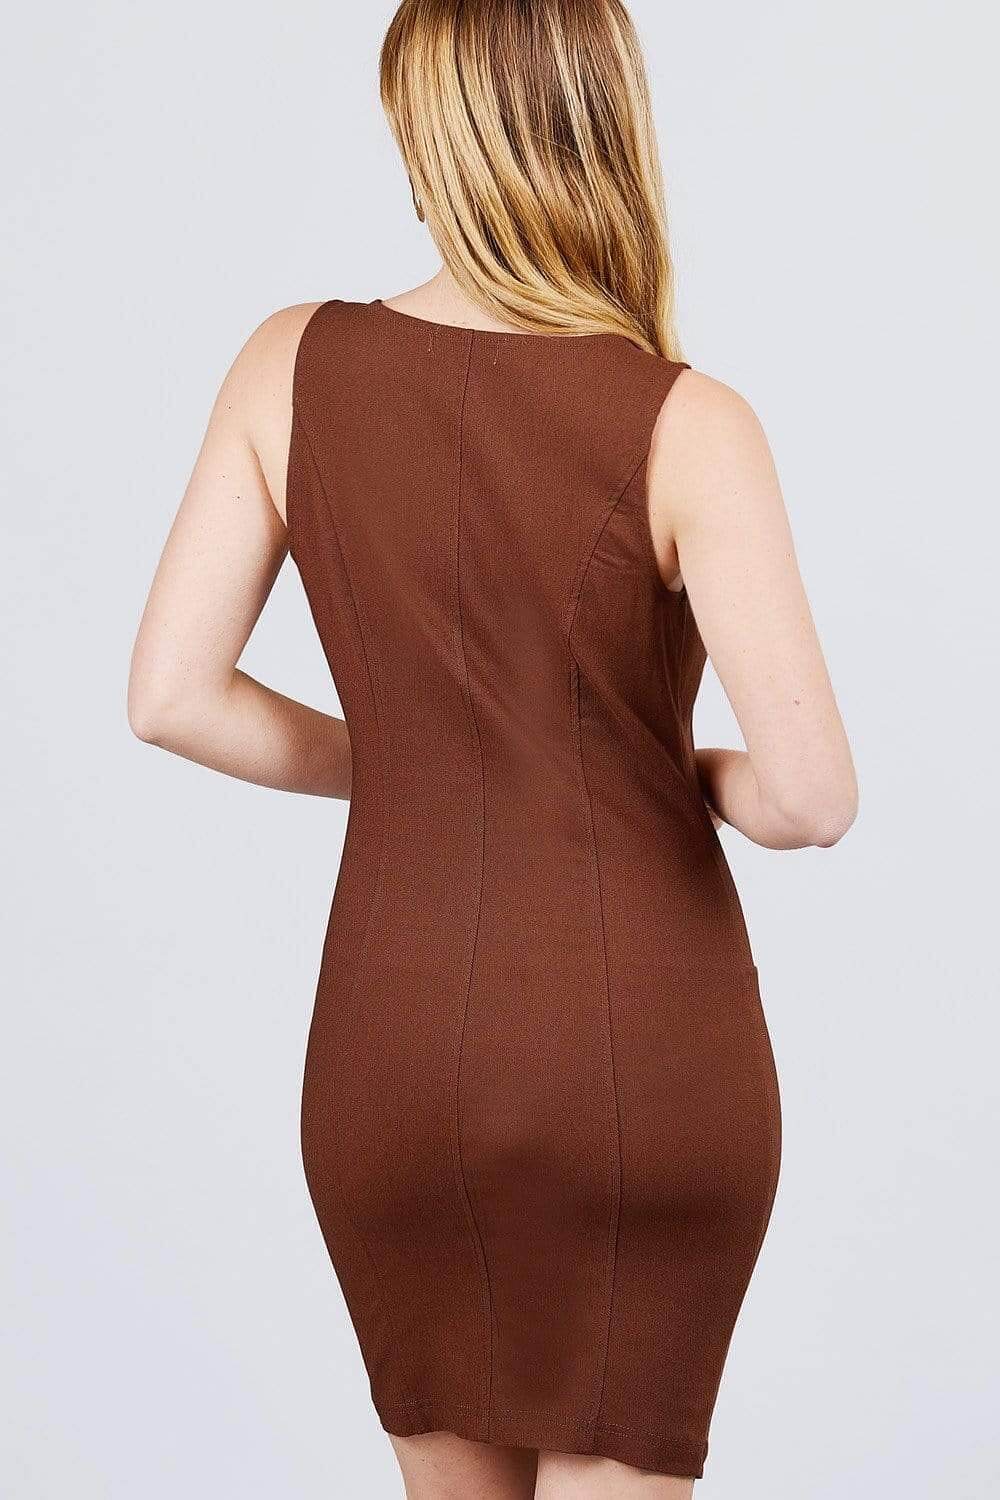 Brown Sleeveless Mini Dress With Front Buttons - Shopping Therapy Dress